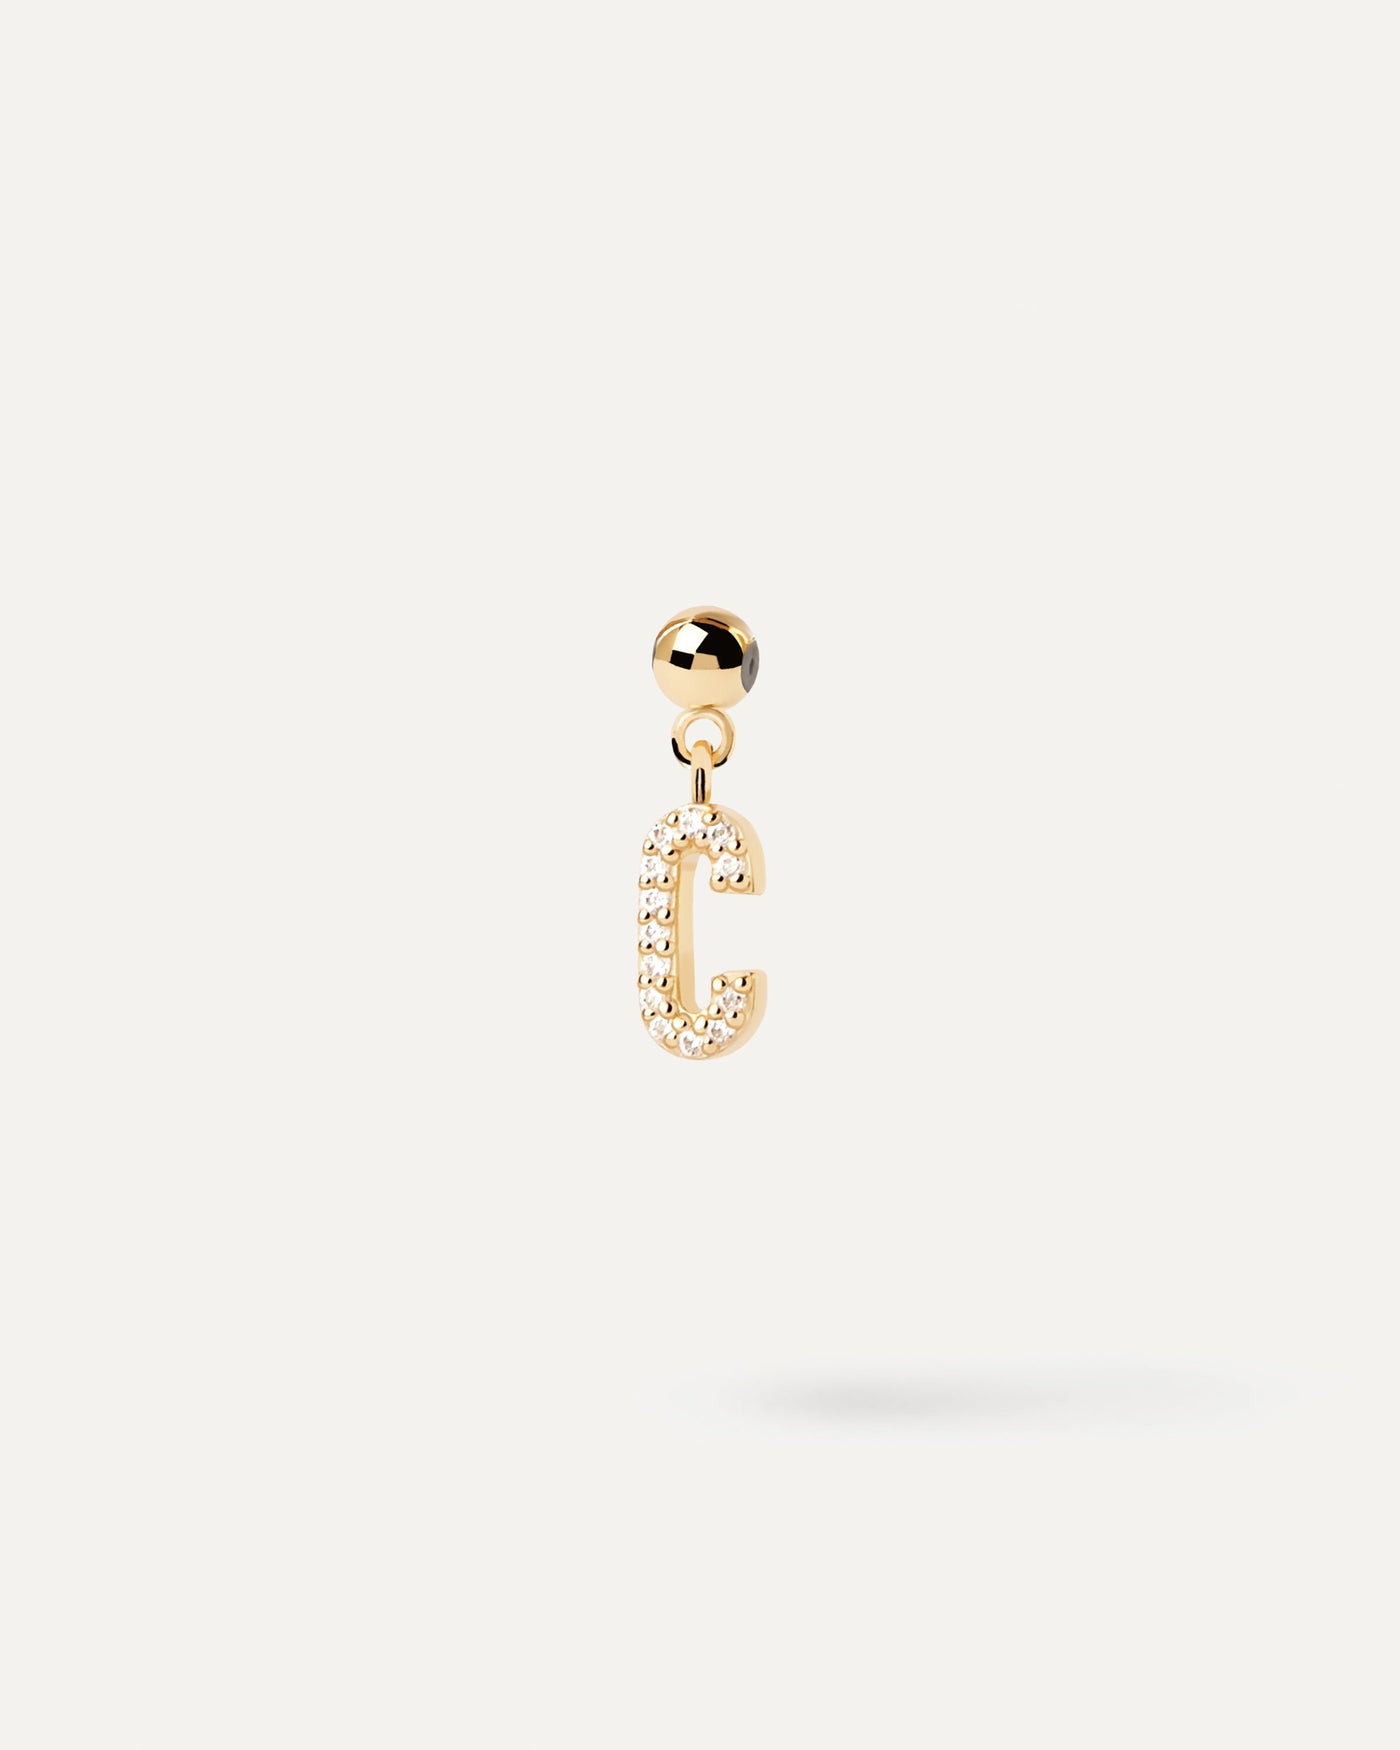 2023 Selection | Letter C Charm. Get the latest arrival from PDPAOLA. Place your order safely and get this Best Seller. Free Shipping.